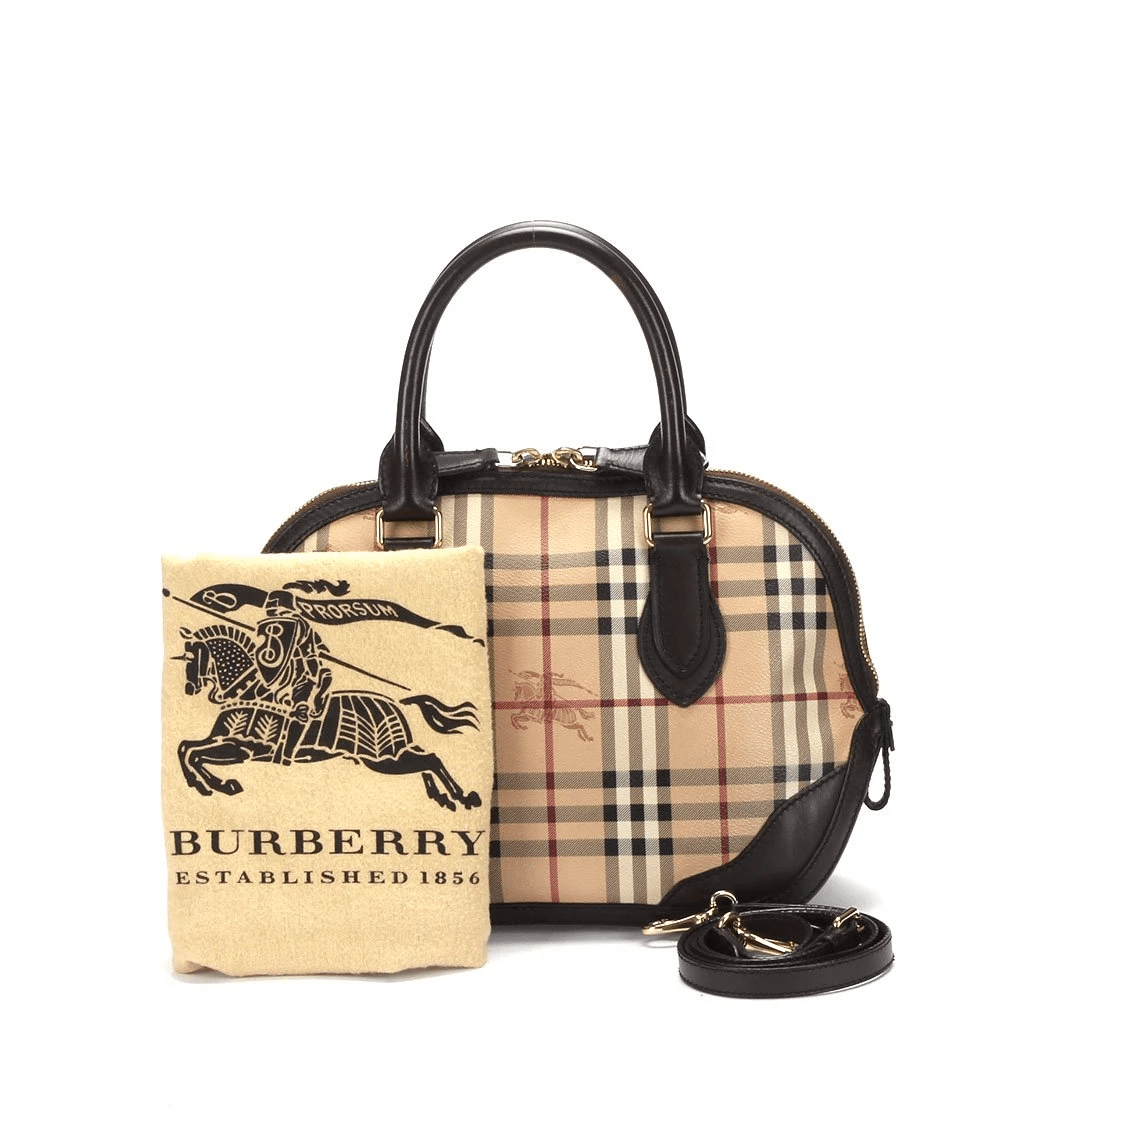 Burberry Burberry Haymarket Check Orchard RCL1029